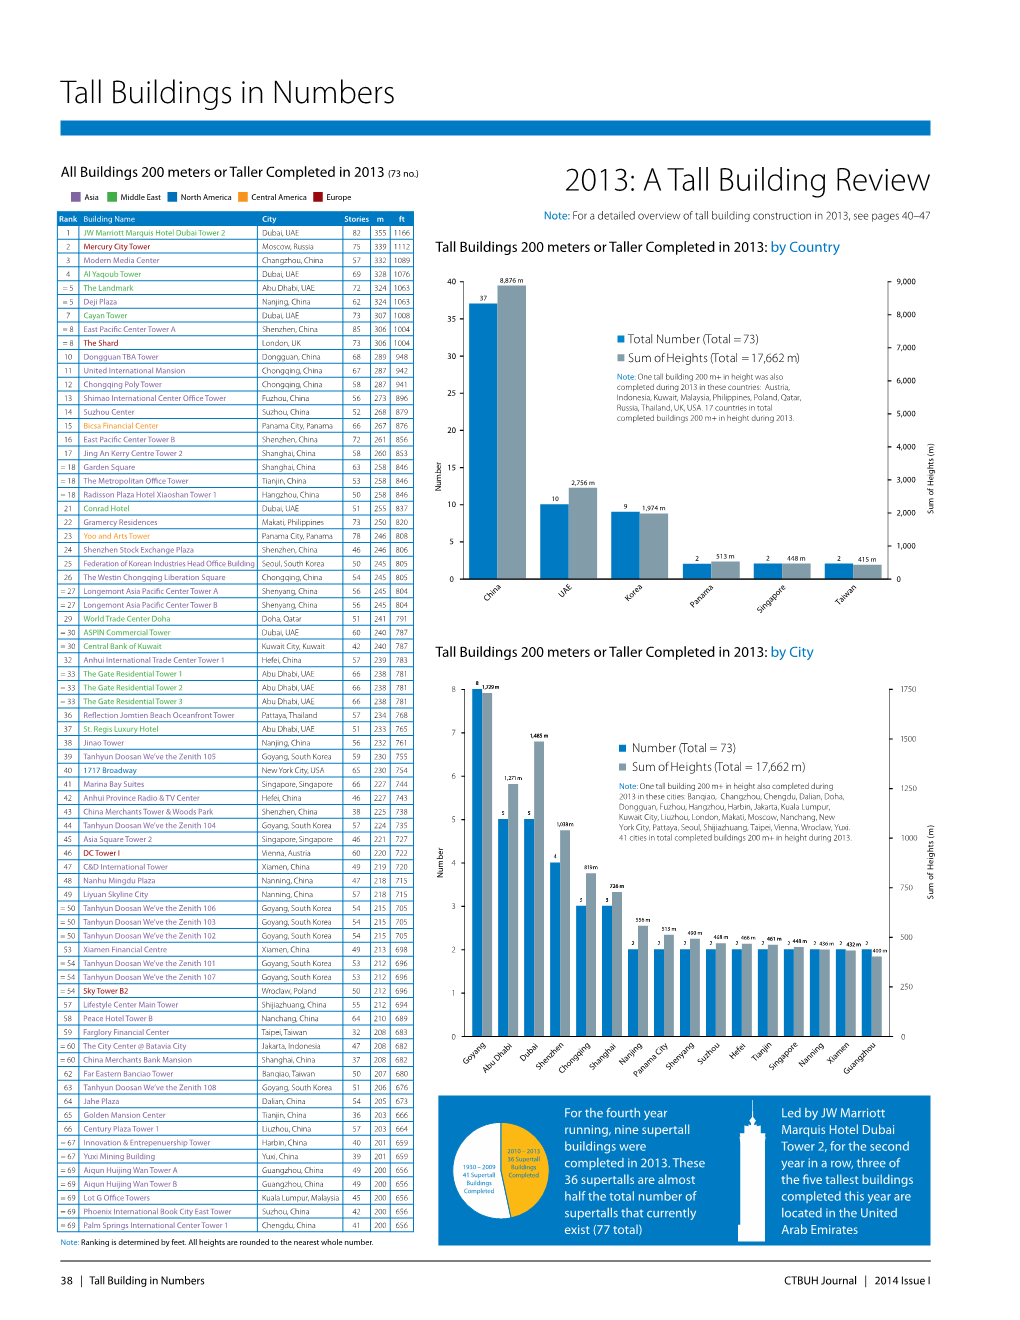 A Tall Building Review Tall Buildings in Numbers